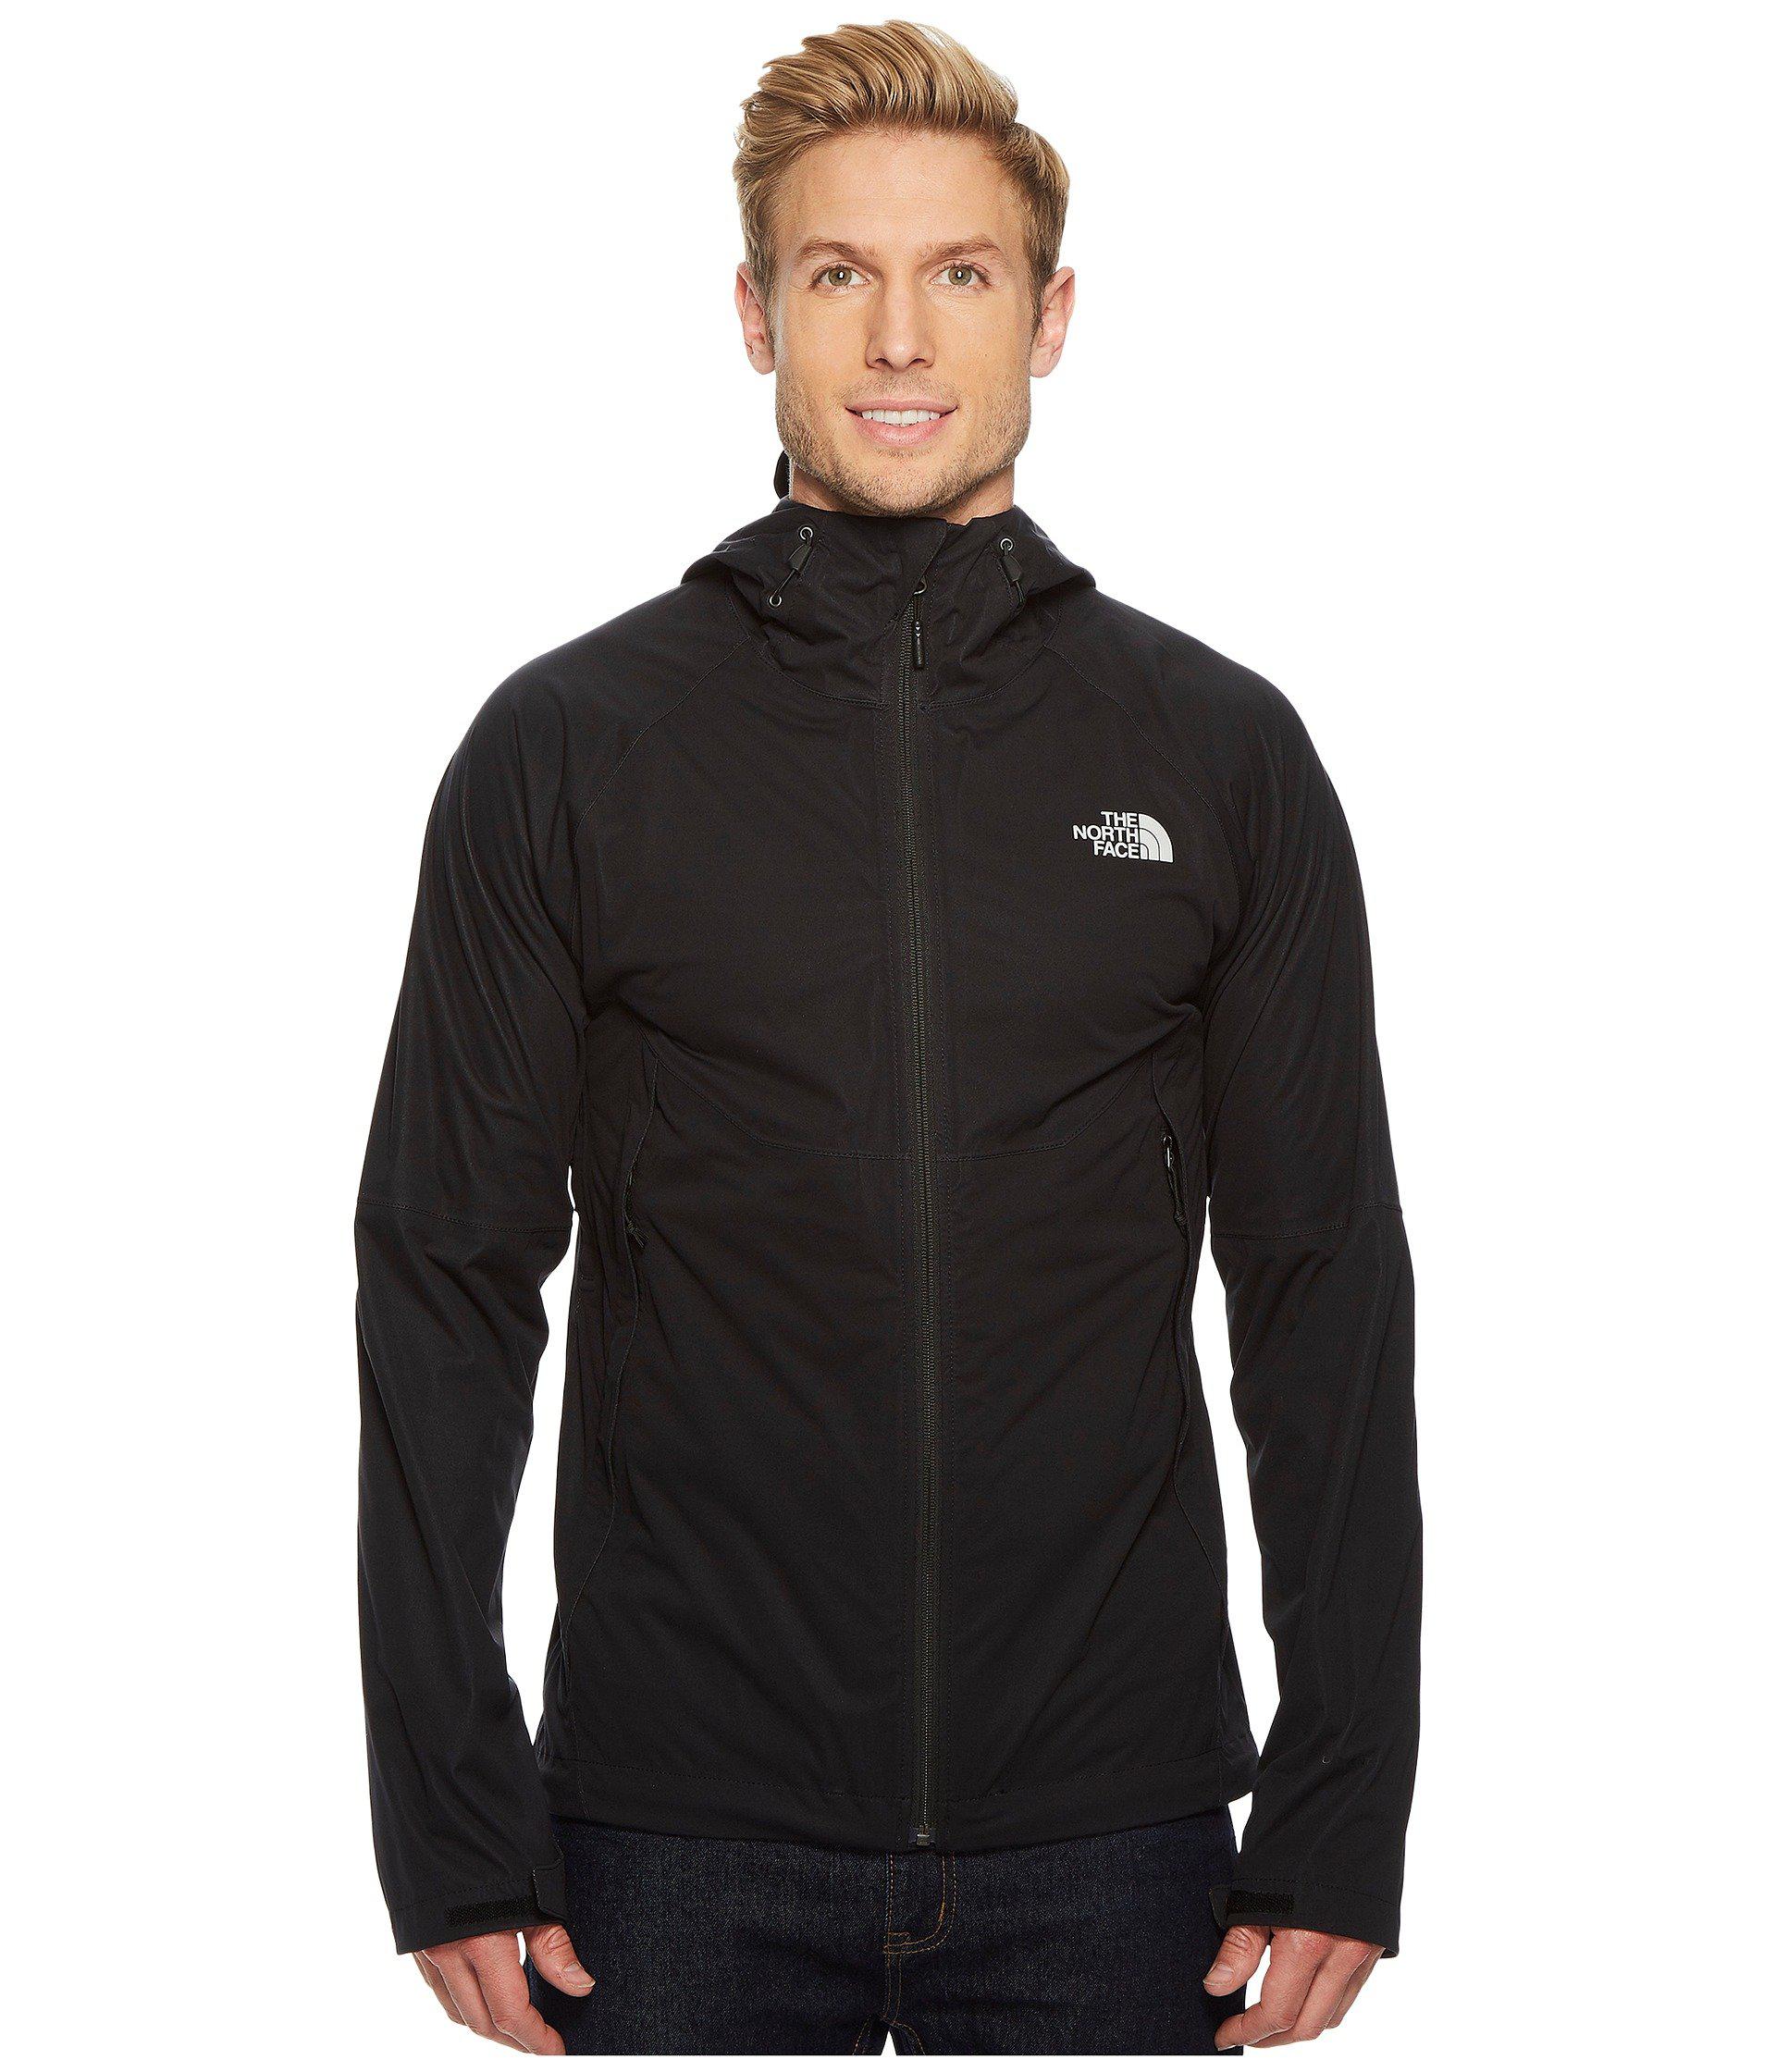 north face allproof stretch jacket men's